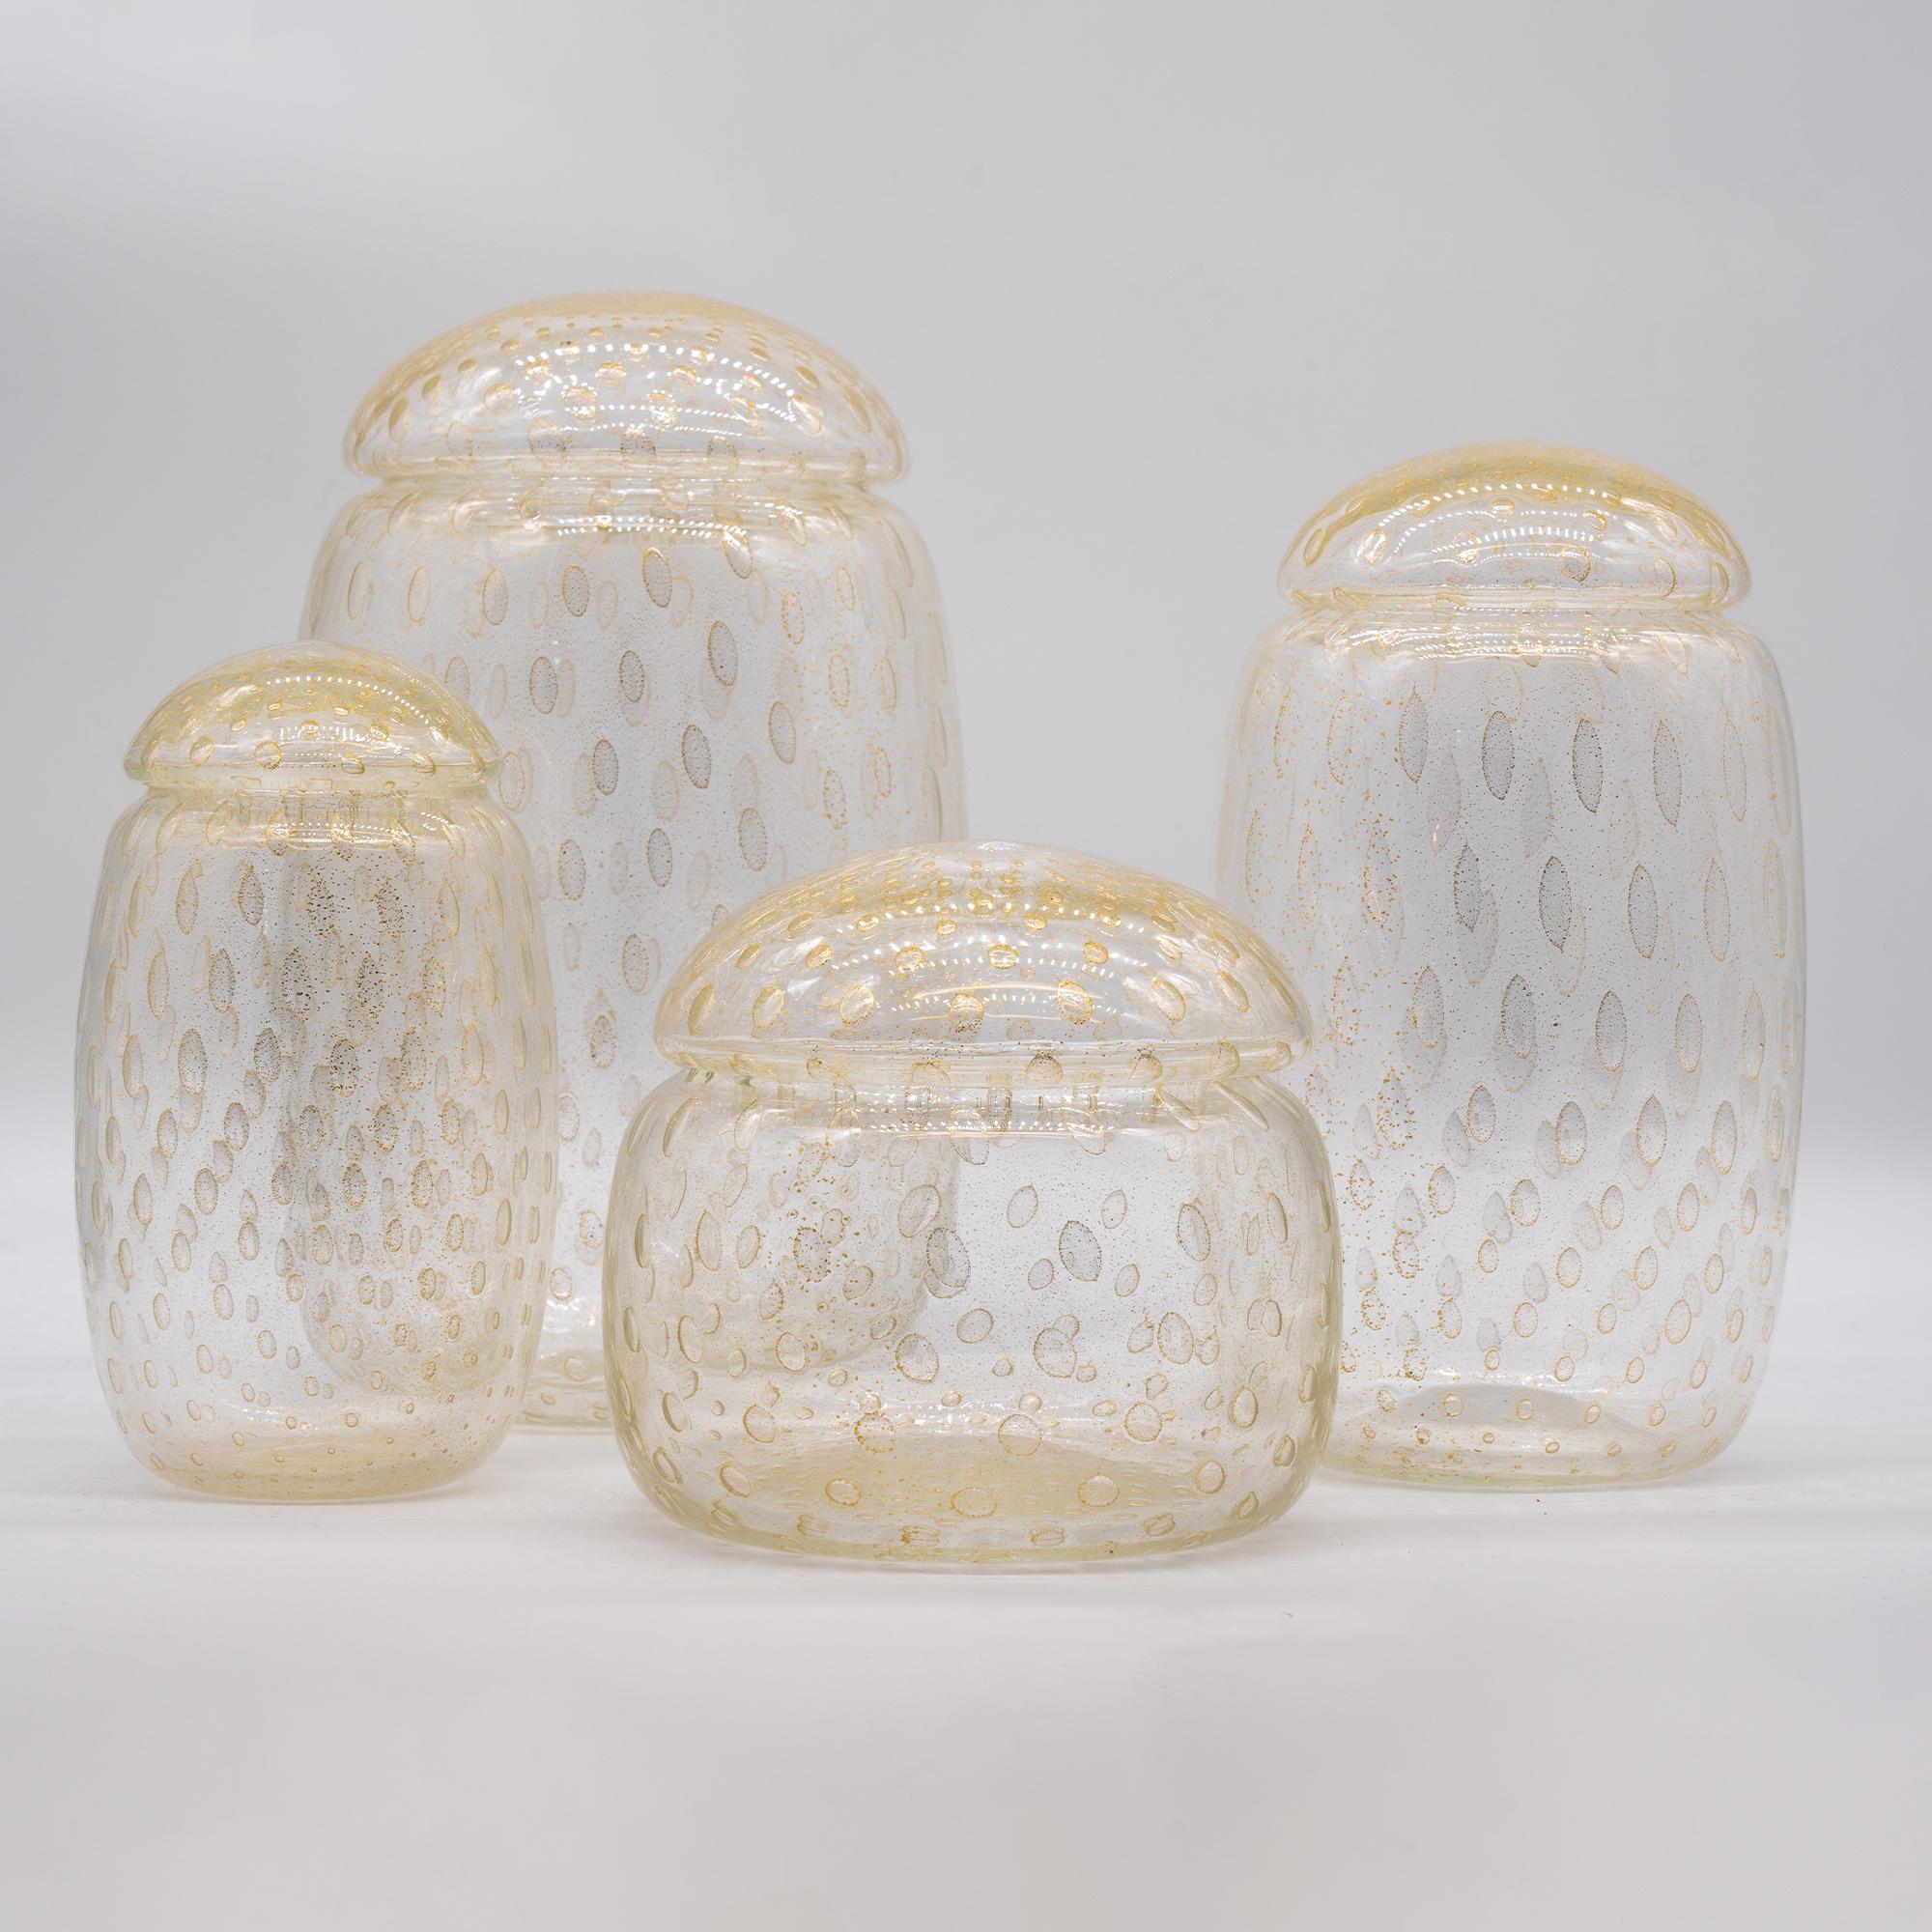 Murano glass potiches vase, mouth blown, in gold color
Made in Murano and purchased directly from the manufacturer.

Set of 4 in different sizes, the big one is 18cm diameter and 20 cm height
Can be used to store small things in kitchen

All